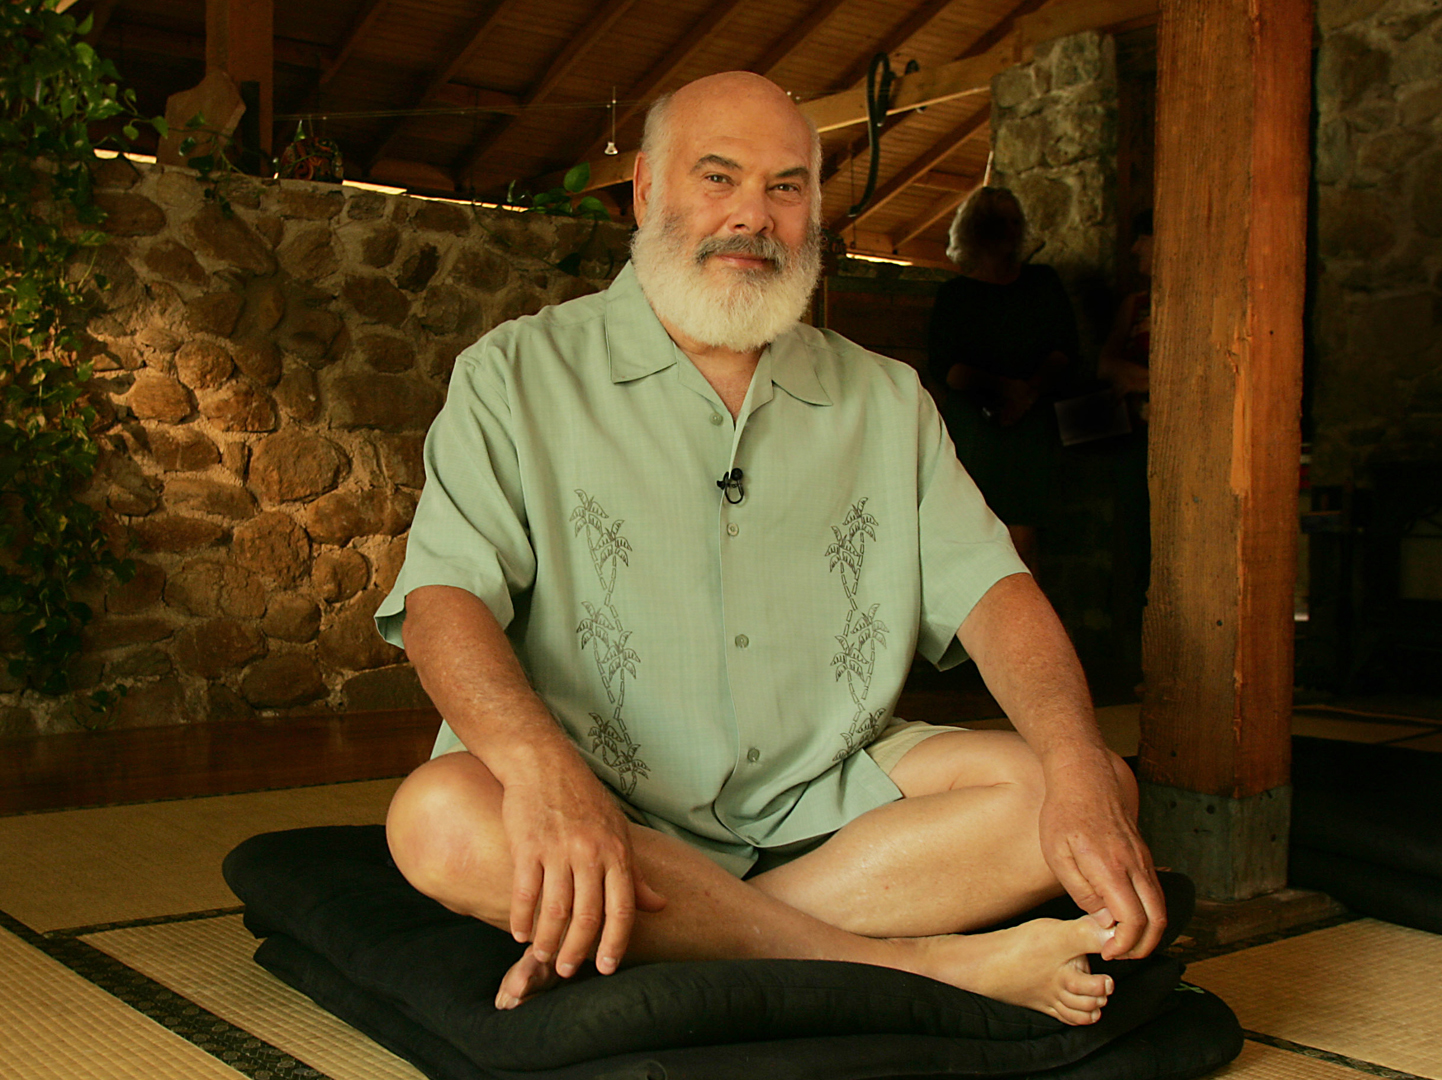 Dr. Andrew Weil casually sitting cross-legged on a cushion